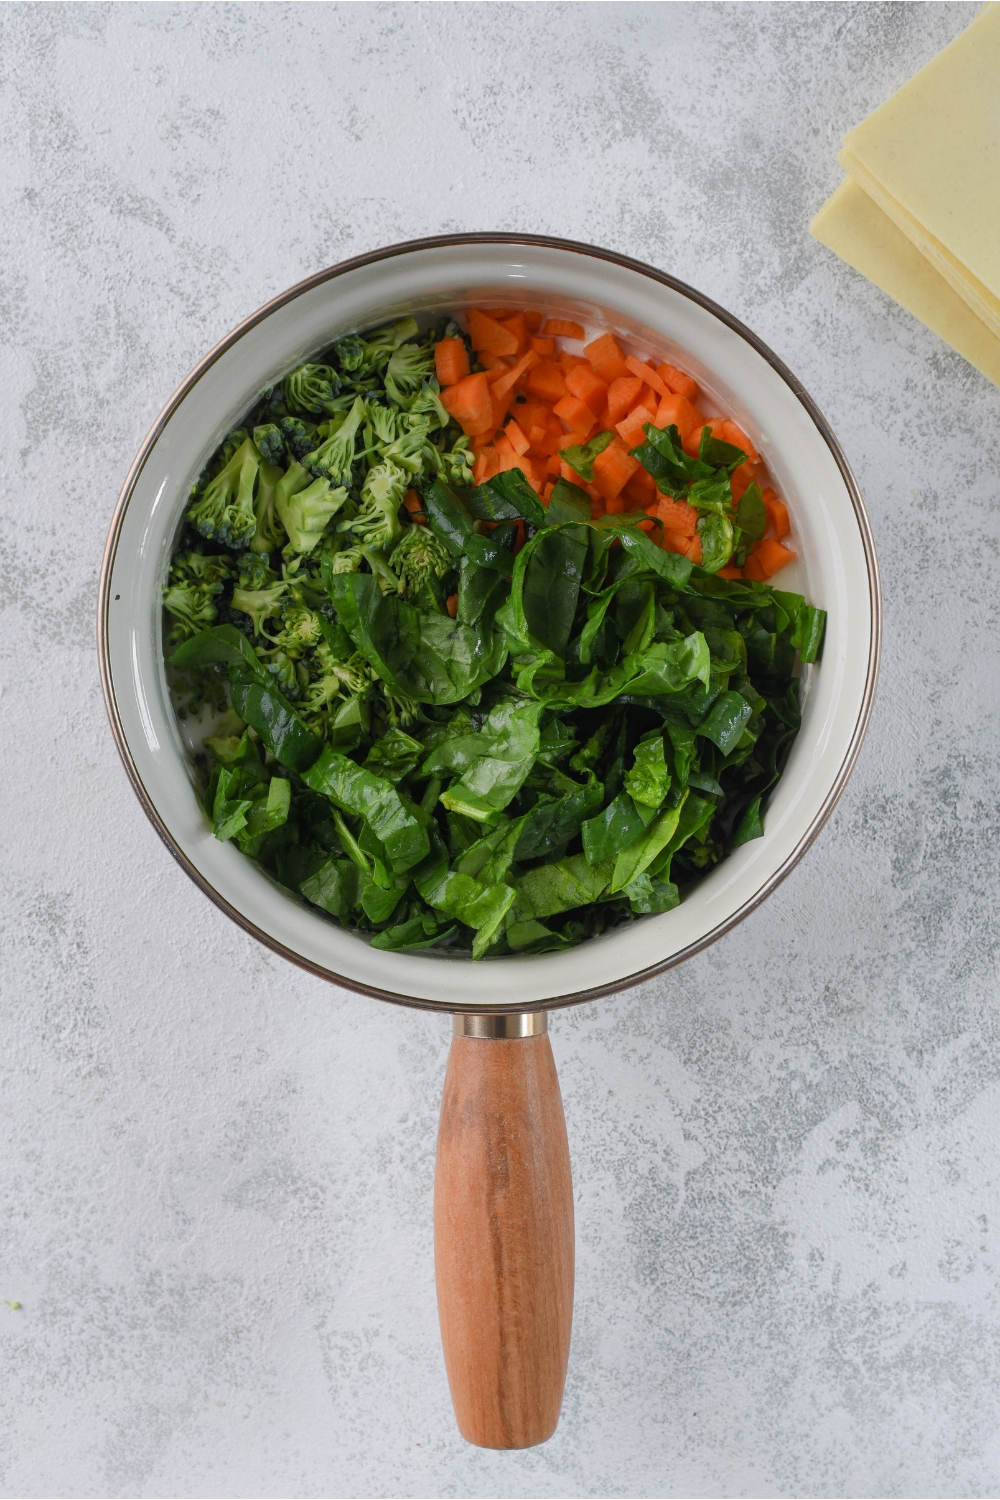 A pot with fresh spinach, diced carrots, and diced broccoli in it.